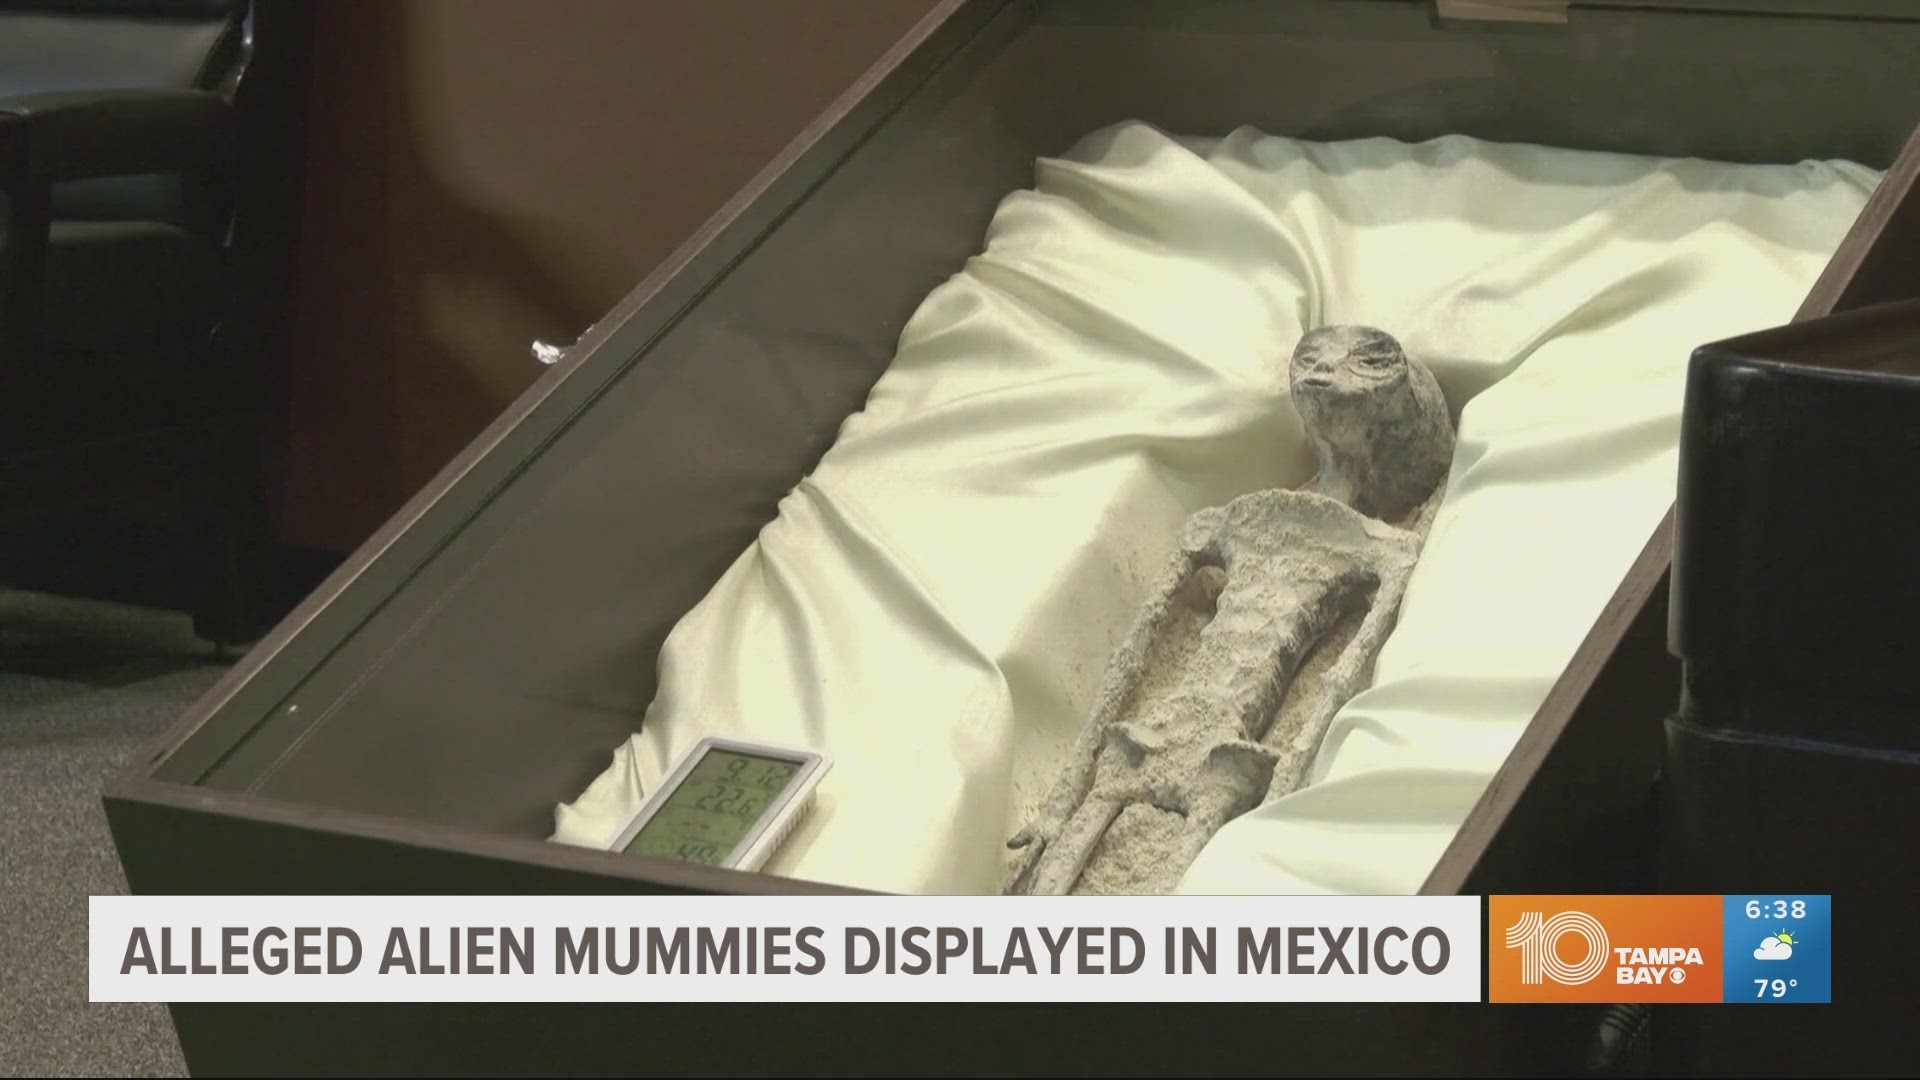 A university in Mexico claims the DNA found on these mummies are non-human life forms. Though scientists have expressed skepticism.